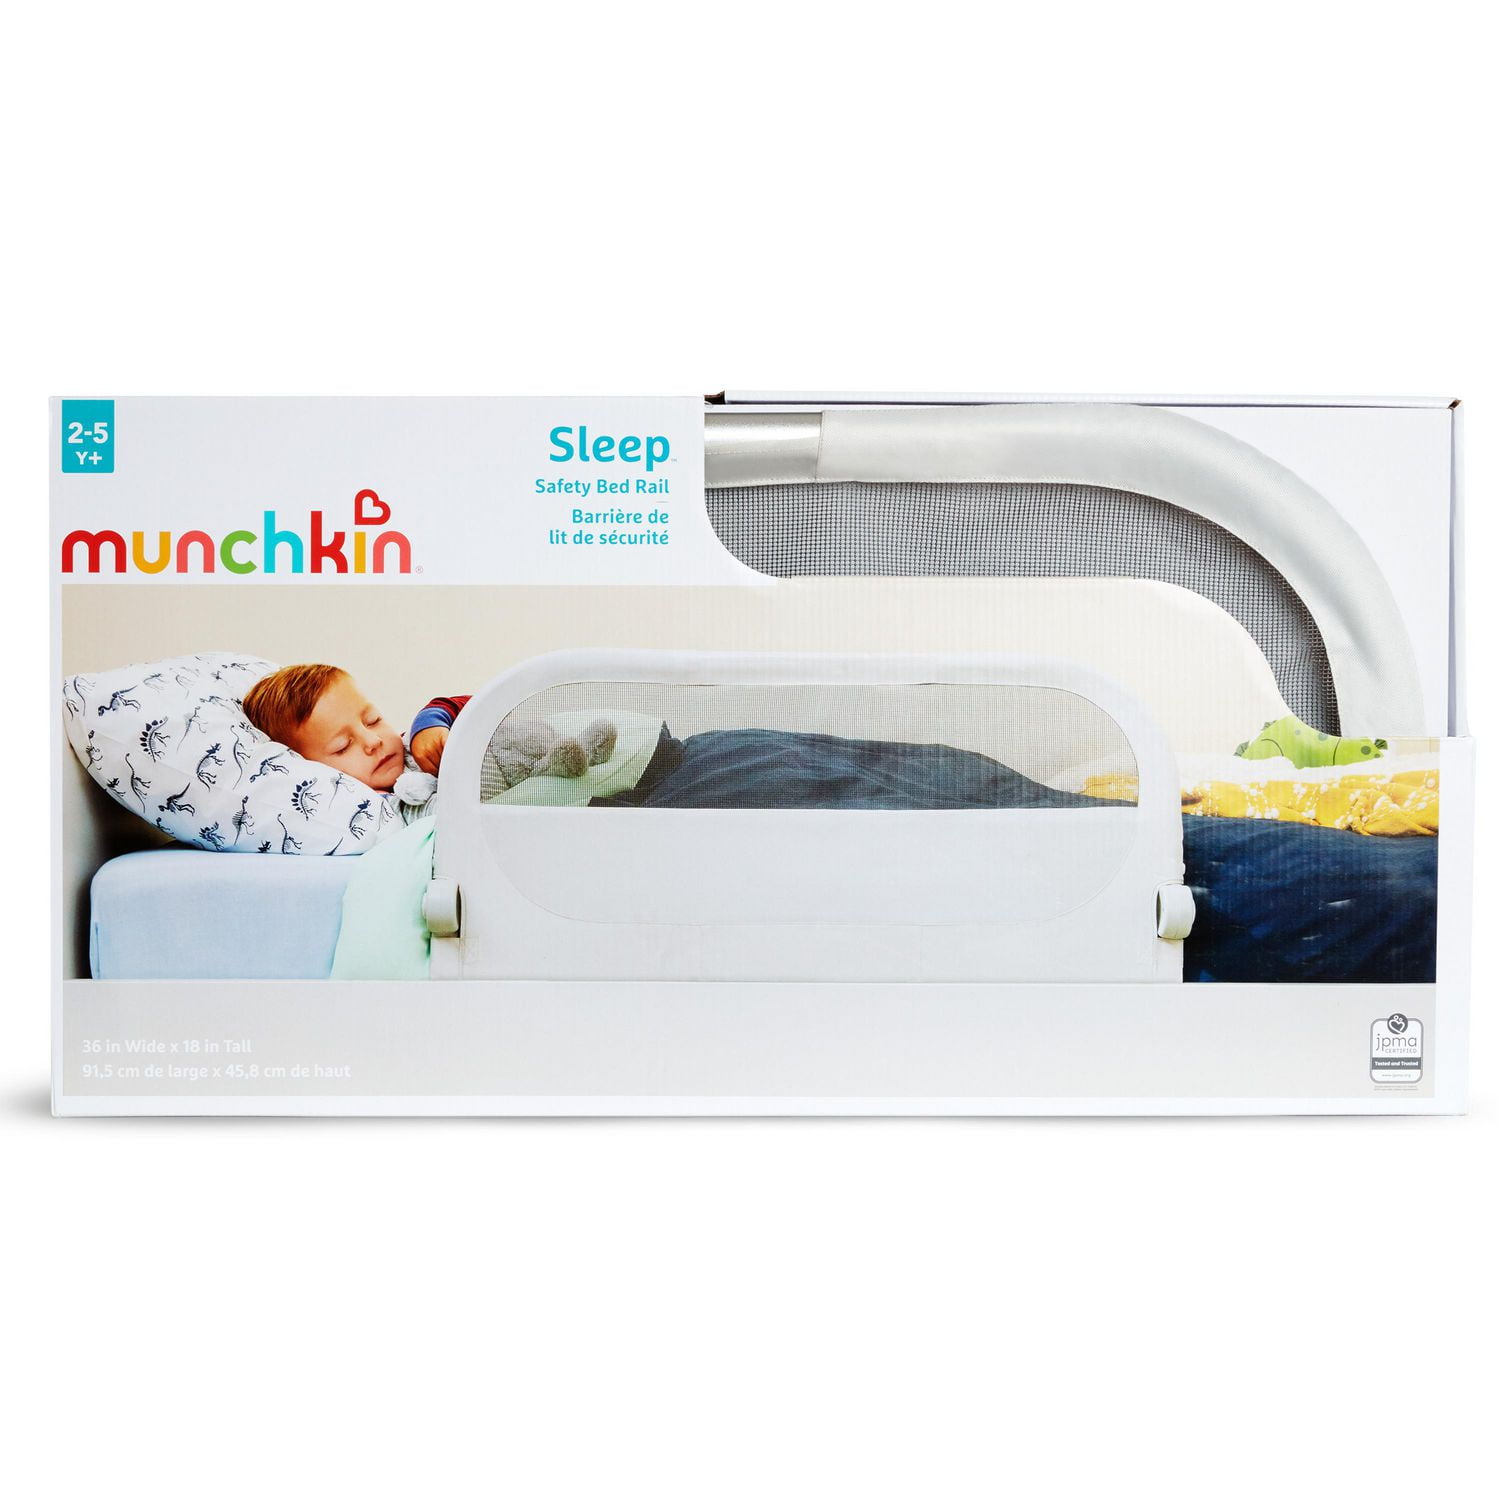 Munchkin Sleep Bed Rail, Fits Twin, Full and Queen Size Mattresses